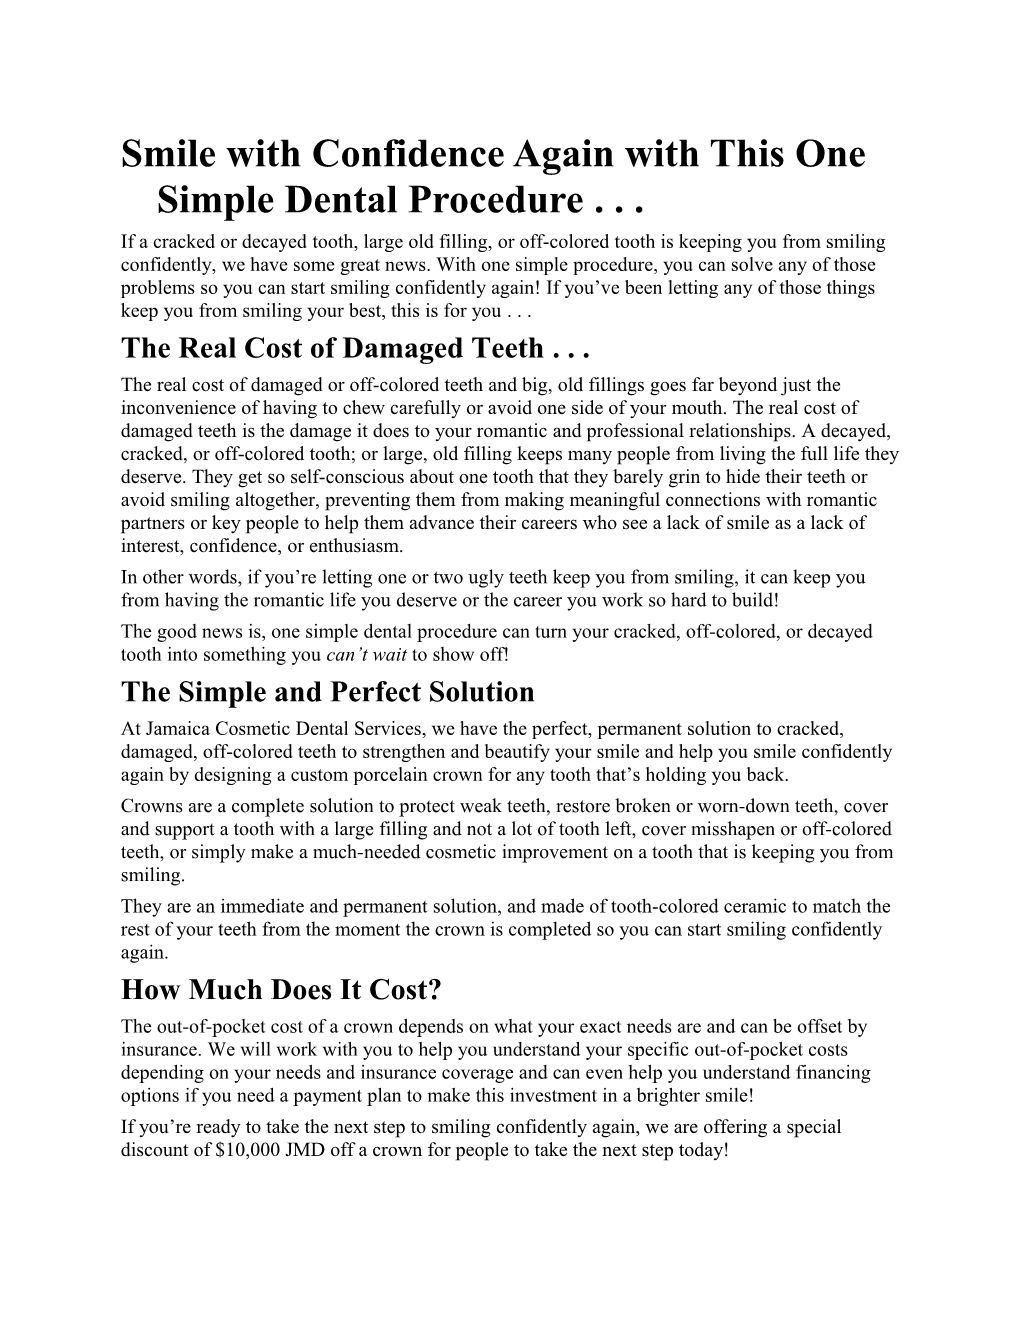 Smile with Confidenceagain with This One Simple Dental Procedure